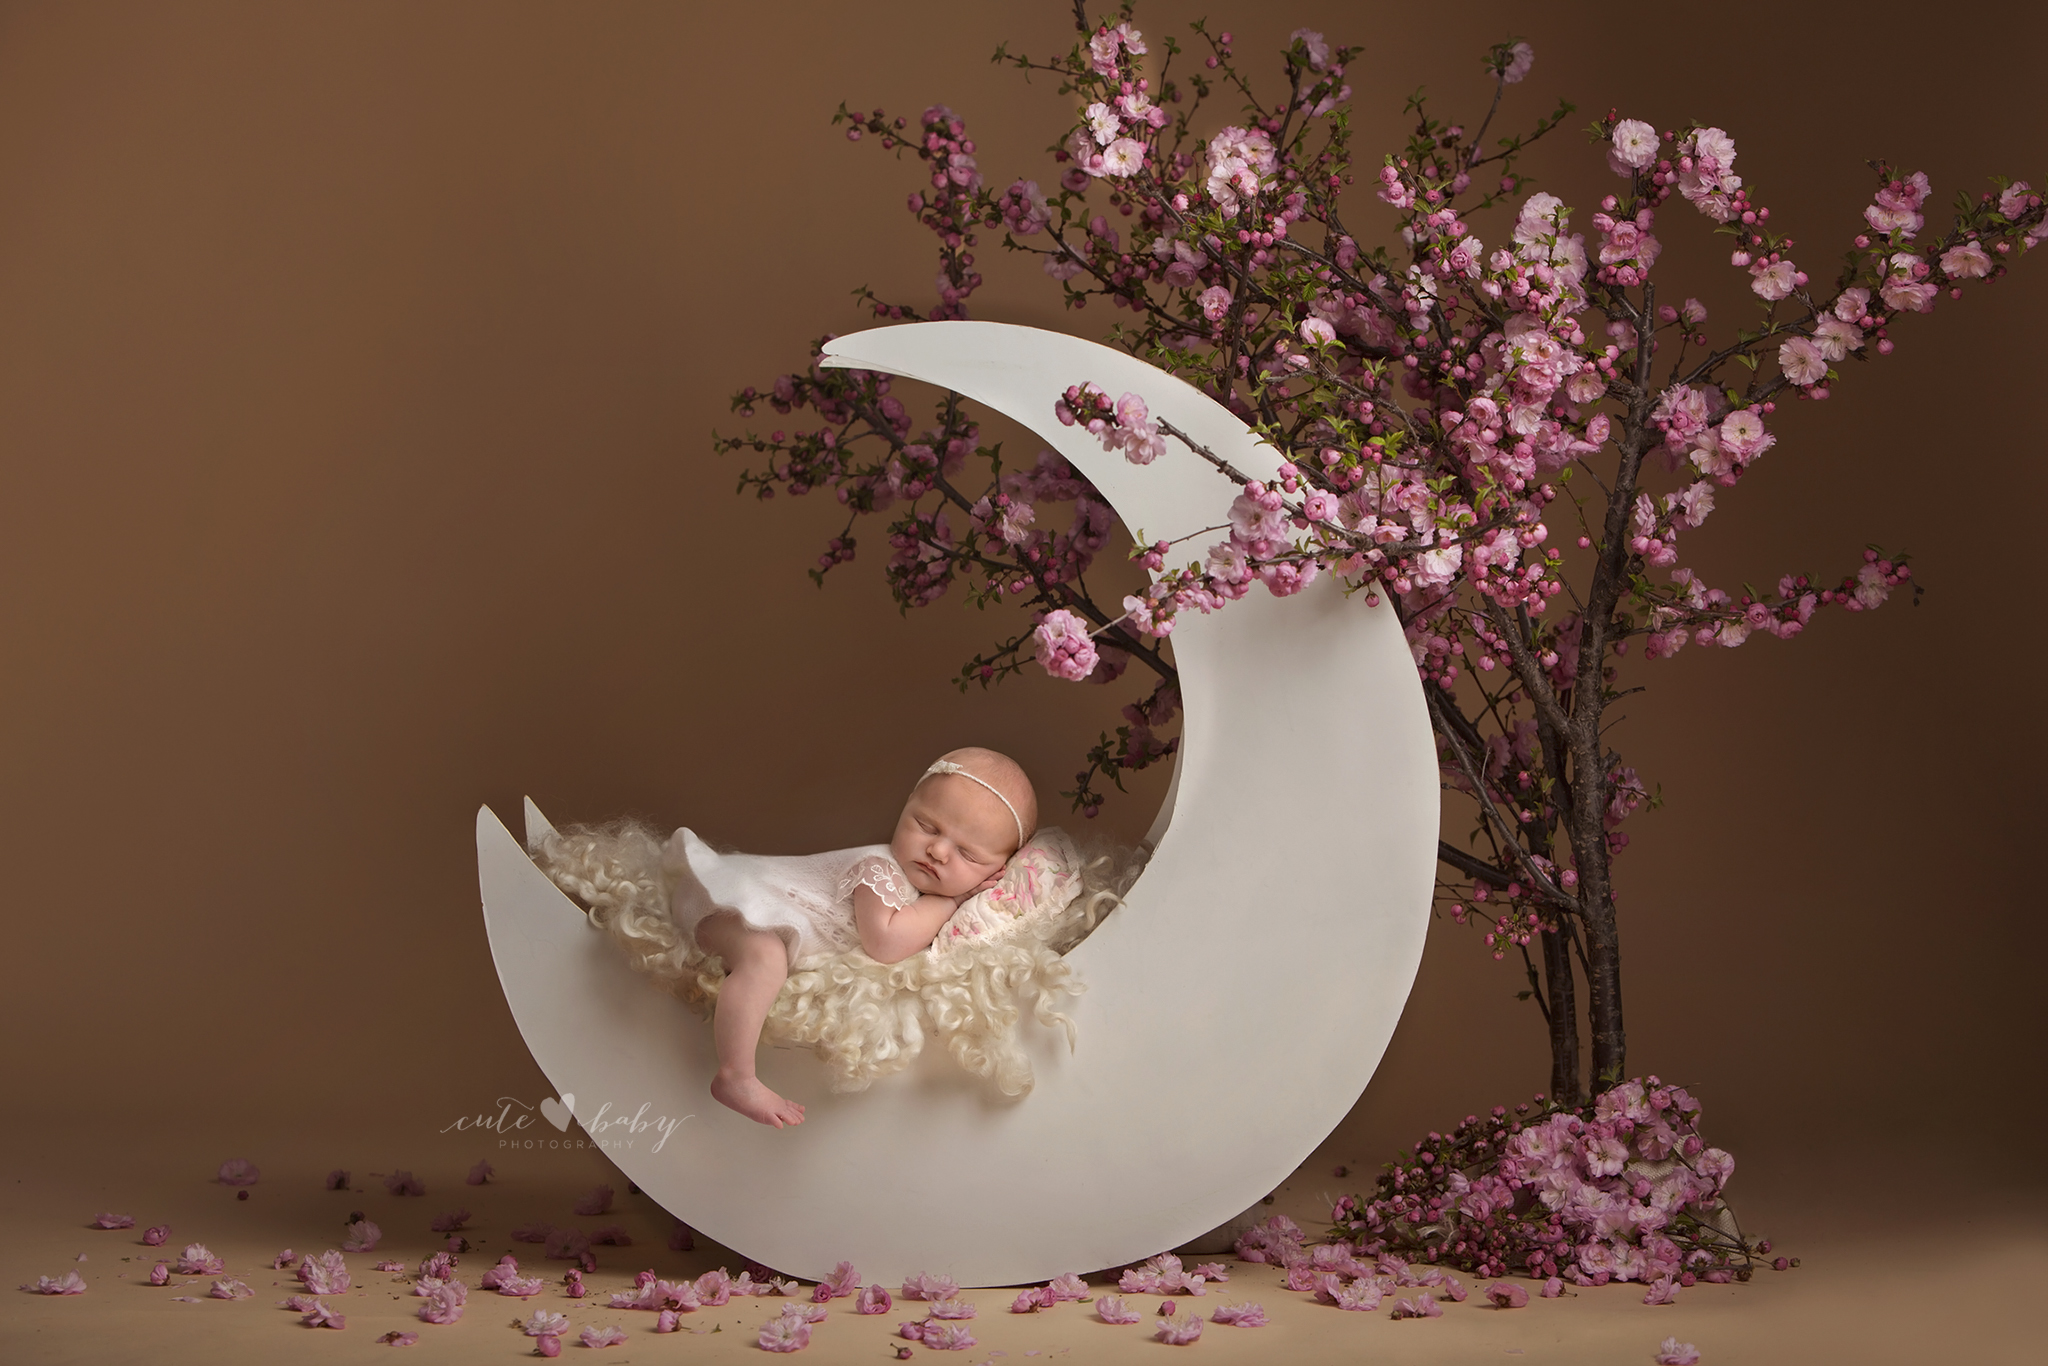 Newborn Photography Manchester by Cute Baby Photography, Newborn photography studio Greater Manchester, Baby Photography, Newborn Session Manchester<br />
